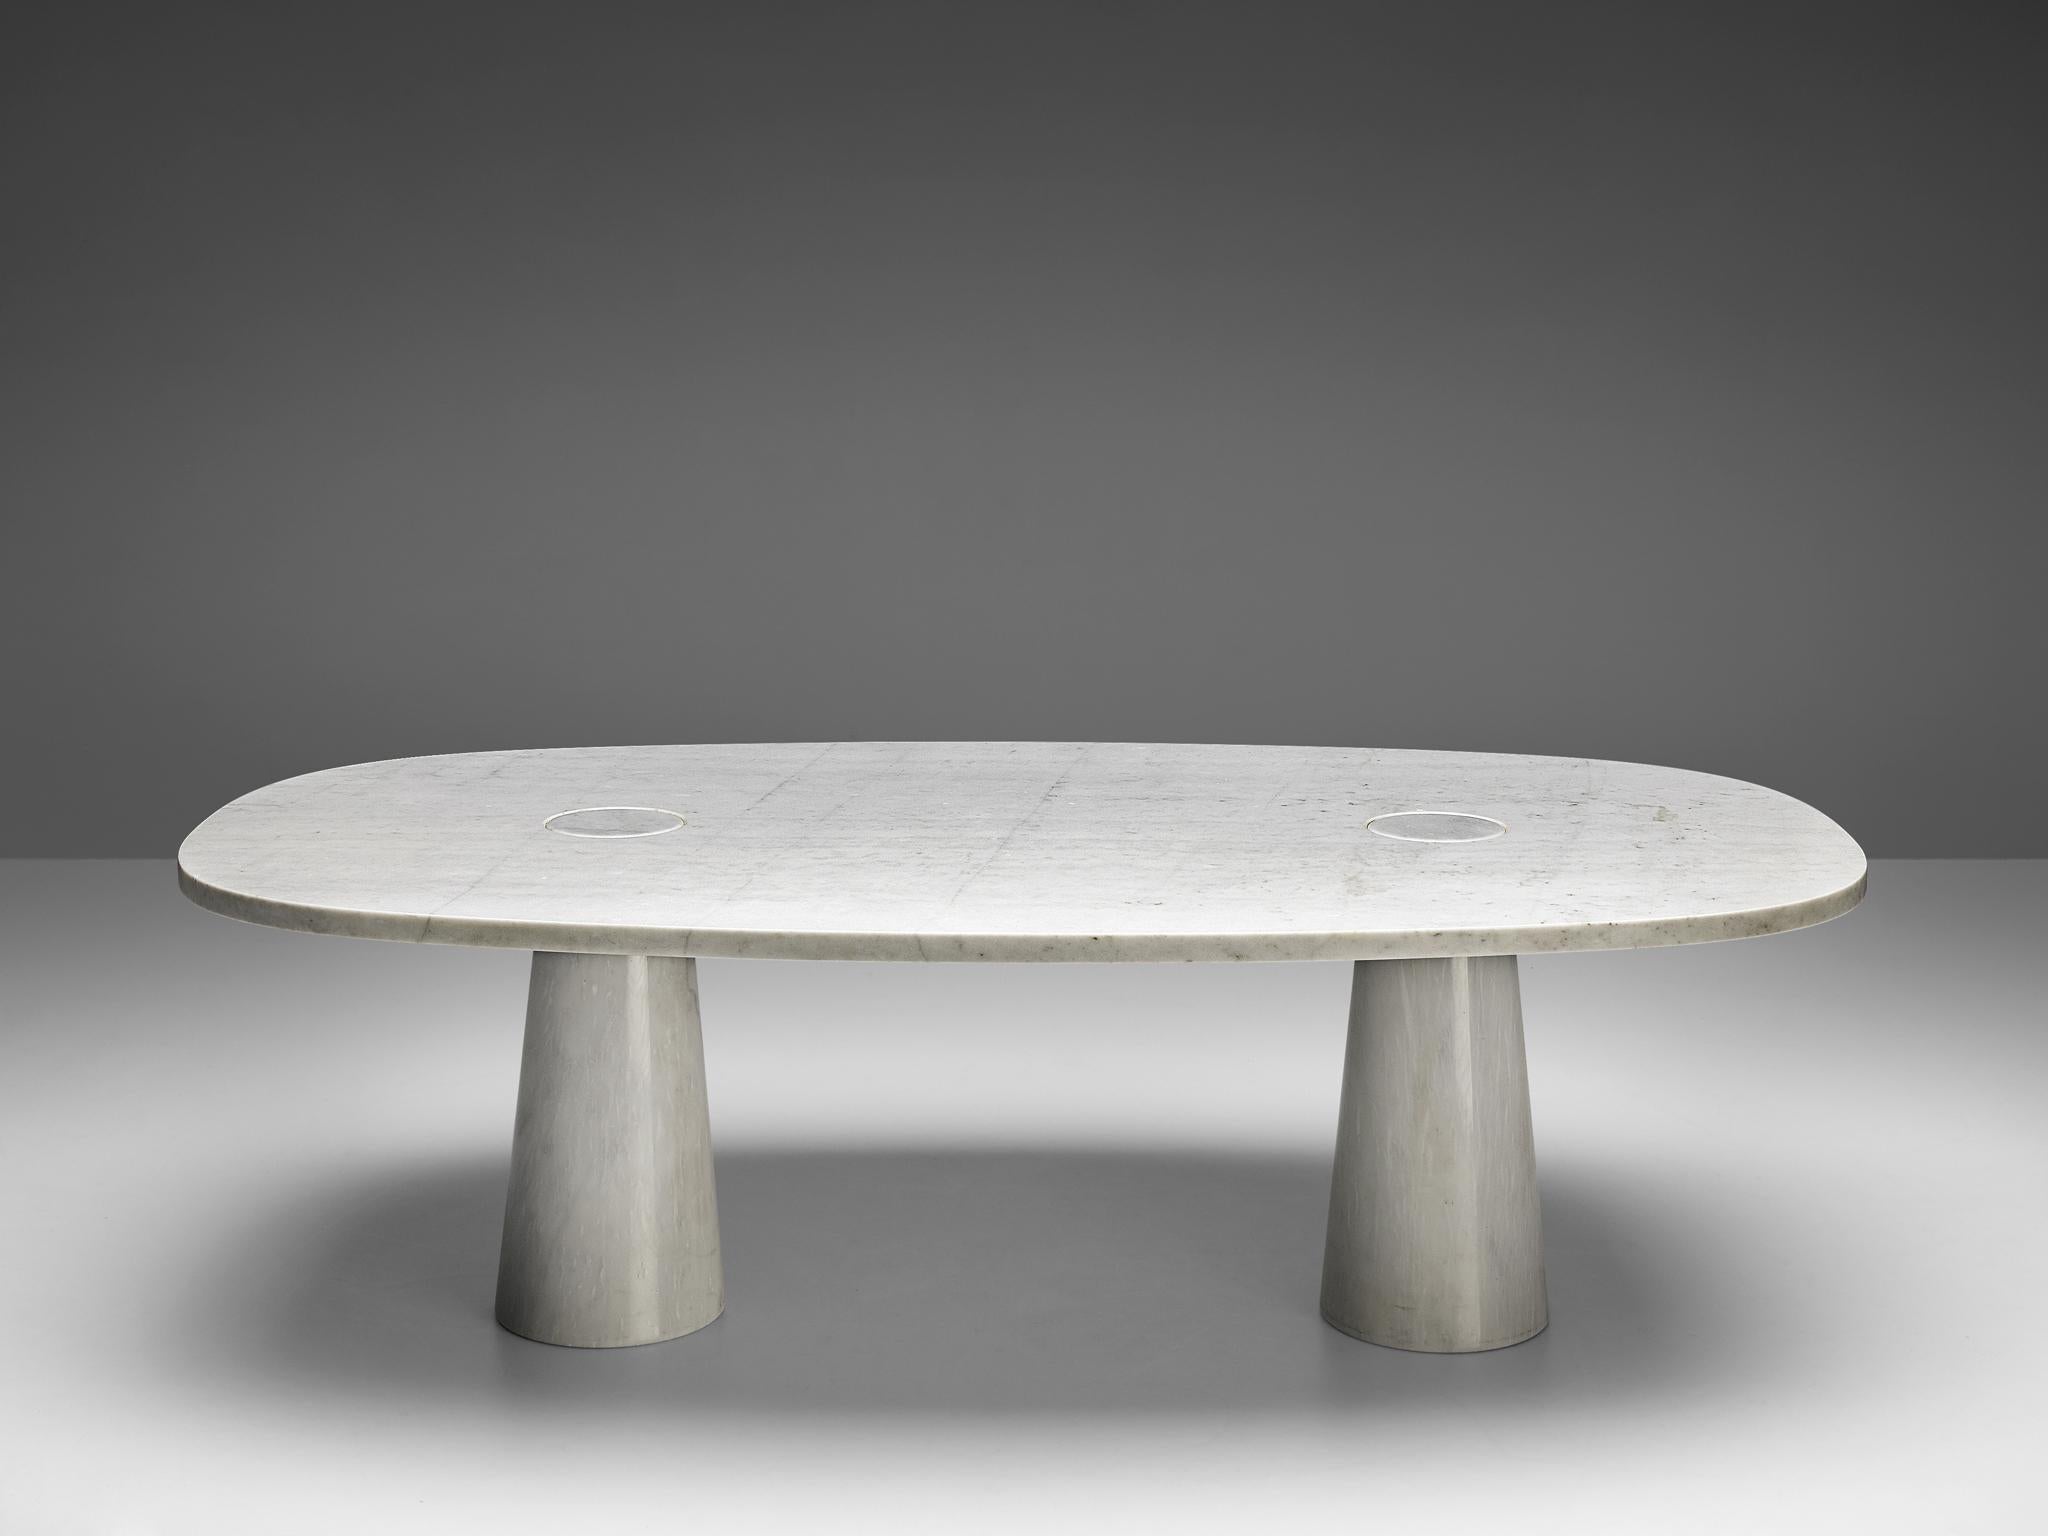 Angelo Mangiarotti, dining table, marble, 1970s.

This sculptural table by Angelo Mangiarotti is a skillful example of postmodern design. The table is executed in white marble. The oval table features no joints or clamps and is architectural in its